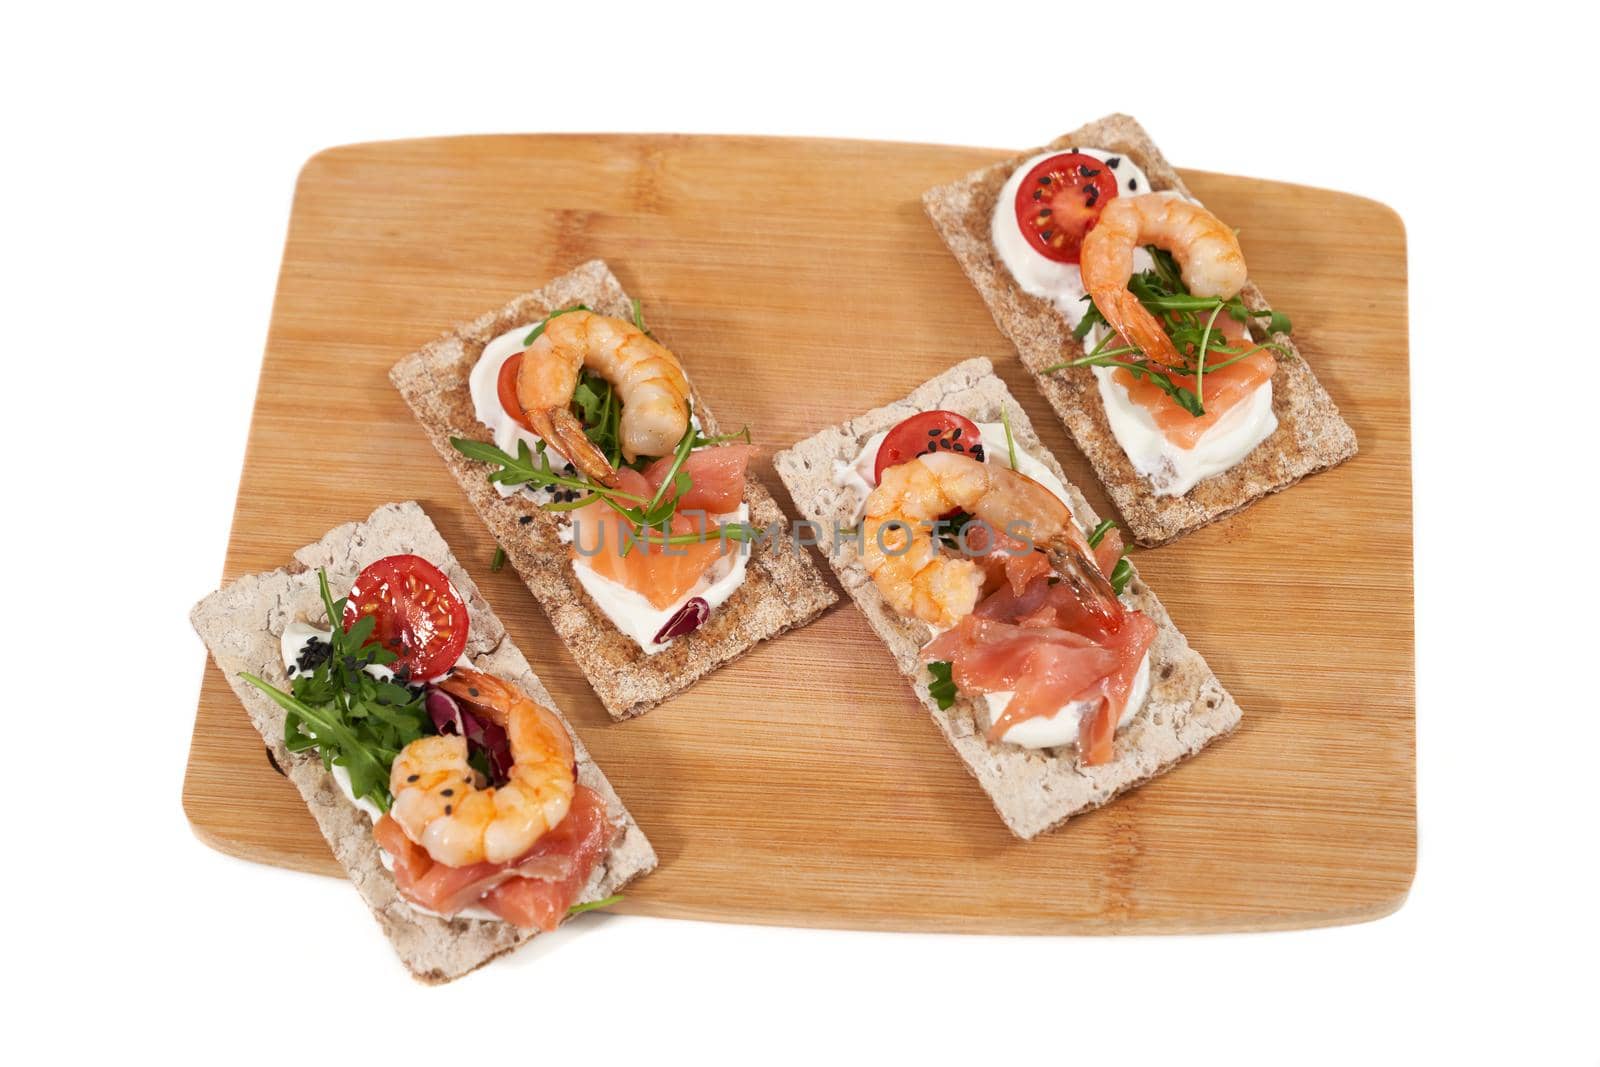  Delicious sandwiches with shrimp, salmon and tomatoes.  by SerhiiBobyk